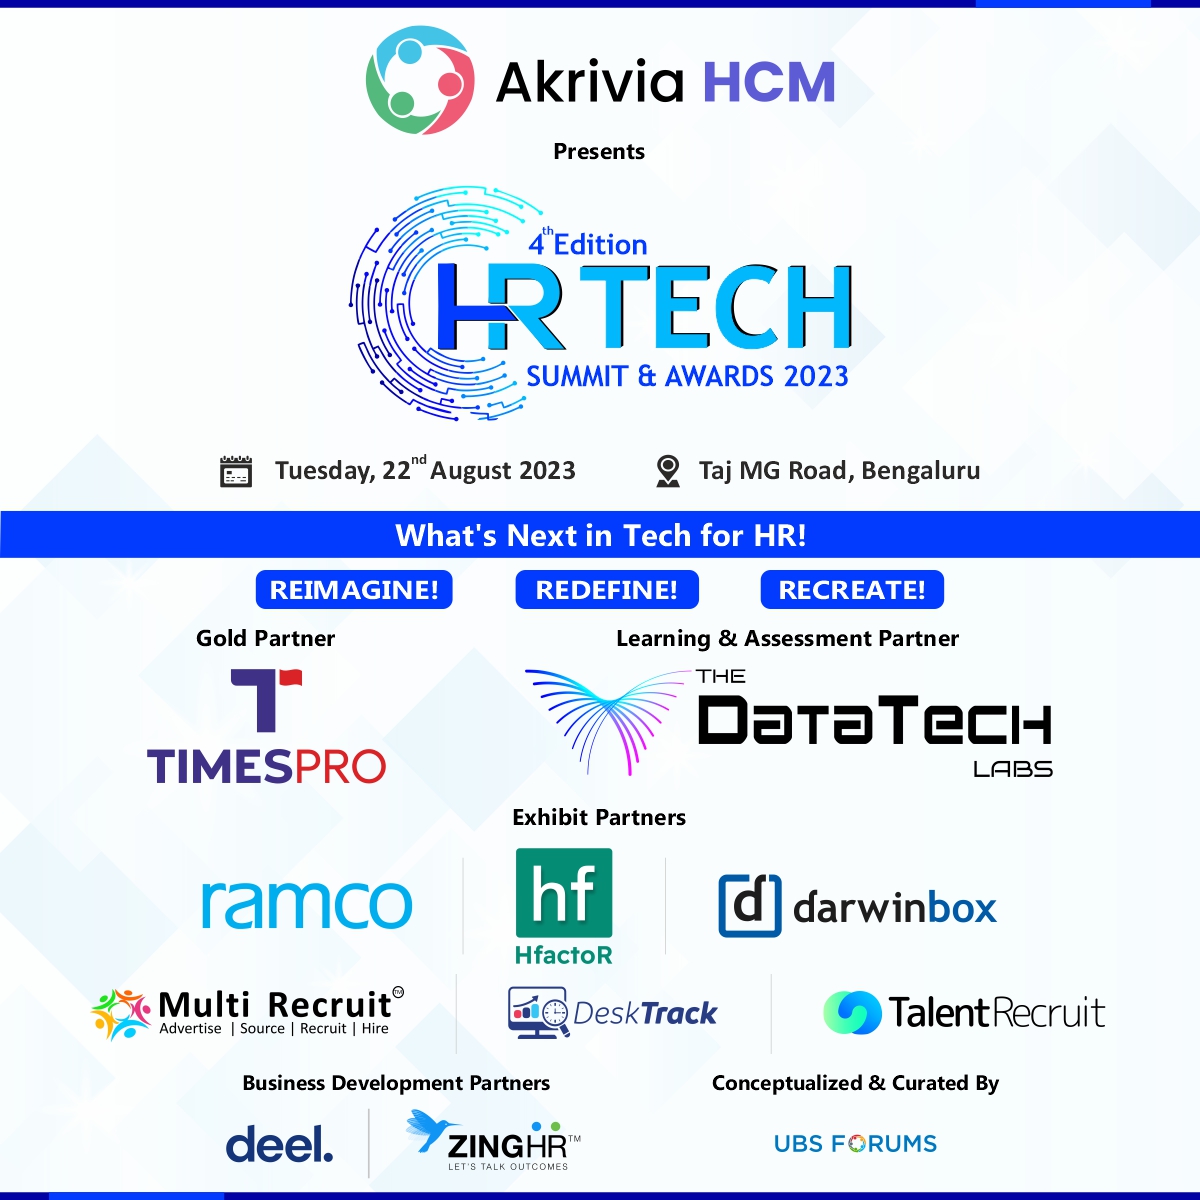 ⚡️ Embrace the energy of collaboration with our Partners for our Exclusive Event on  '4th Edition HR Tech Summit & Awards 2023' on 22nd August 2023 at Taj MG Road, Bengaluru.
@MultiRecruit, 𝐇𝐟𝐚𝐜𝐭𝐨𝐑 , @thedarwinbox
Register At- tinyurl.com/5n8w72rn 
#UBSFHRTech